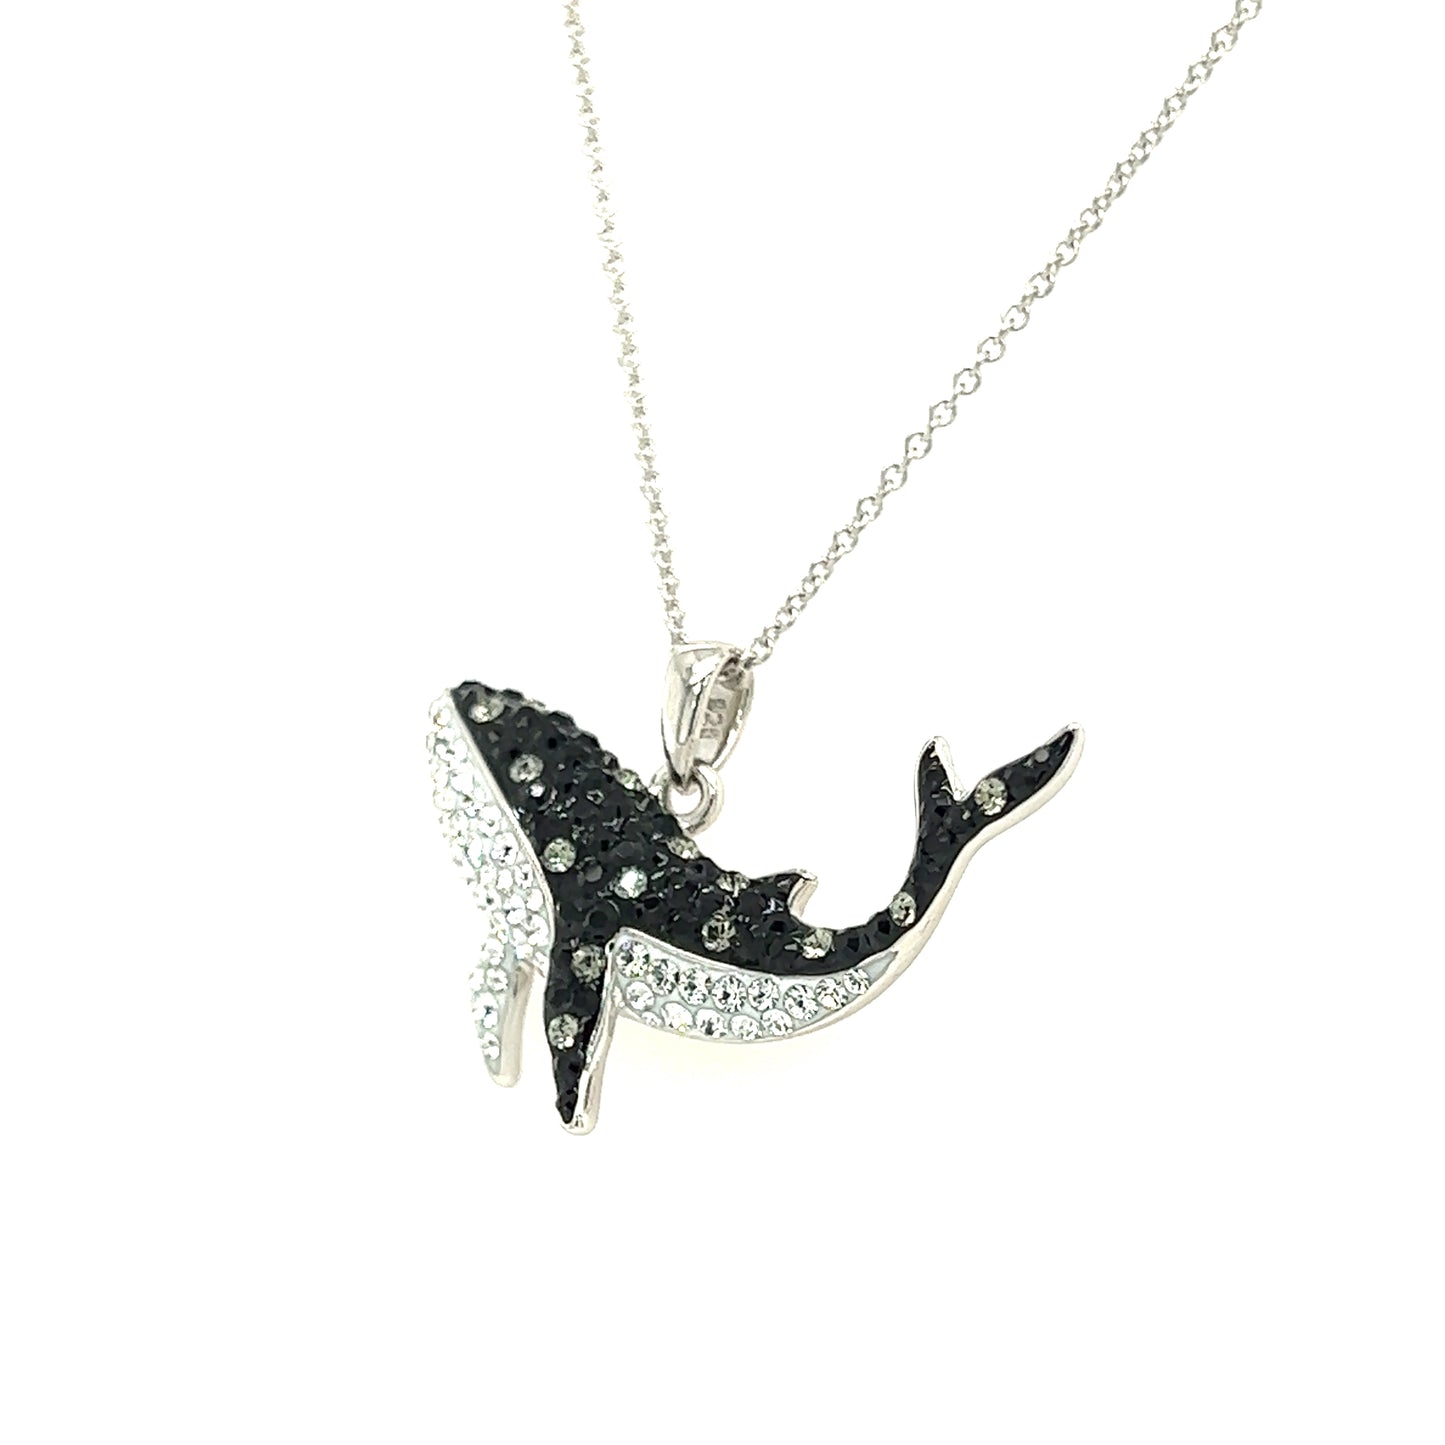 Orca Whale Necklace with Black and White Crystals in Sterling Silver Right Side View